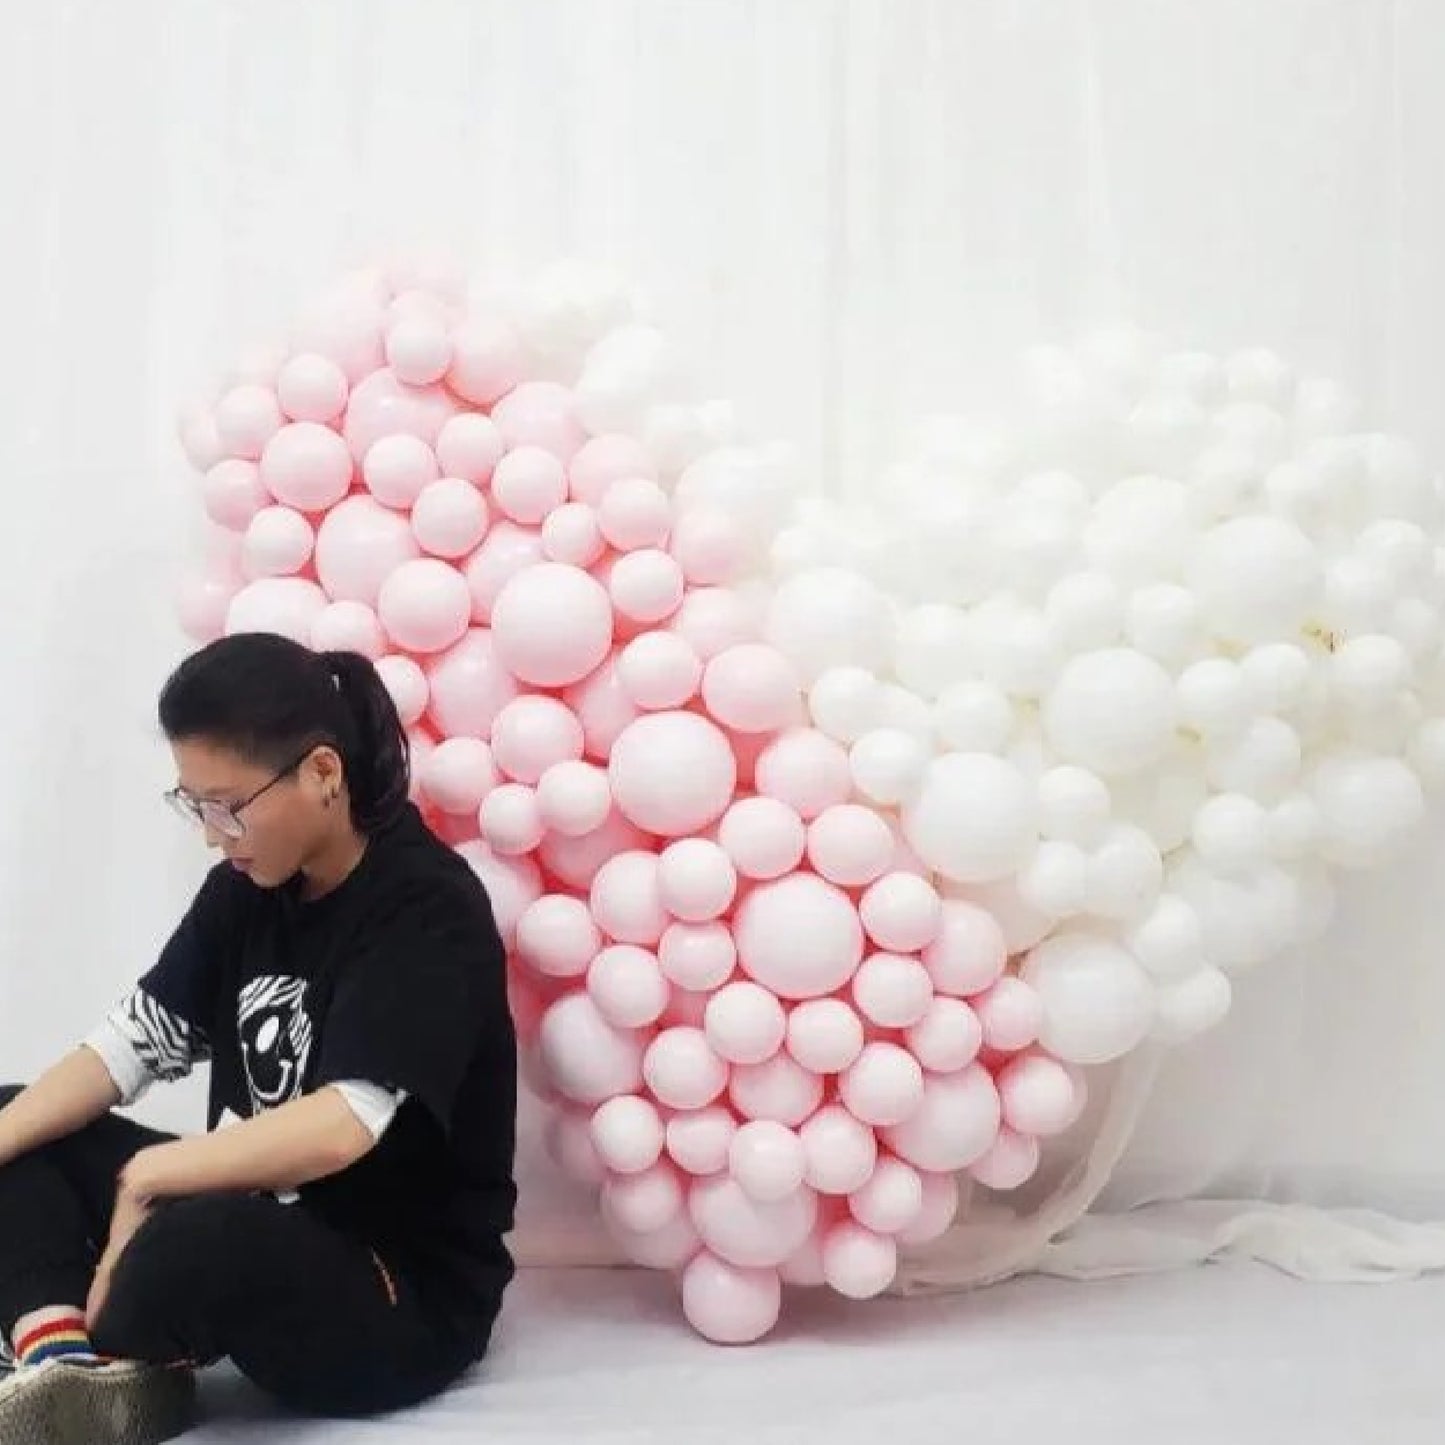 Giant Balloon Heart Pink & White ombre